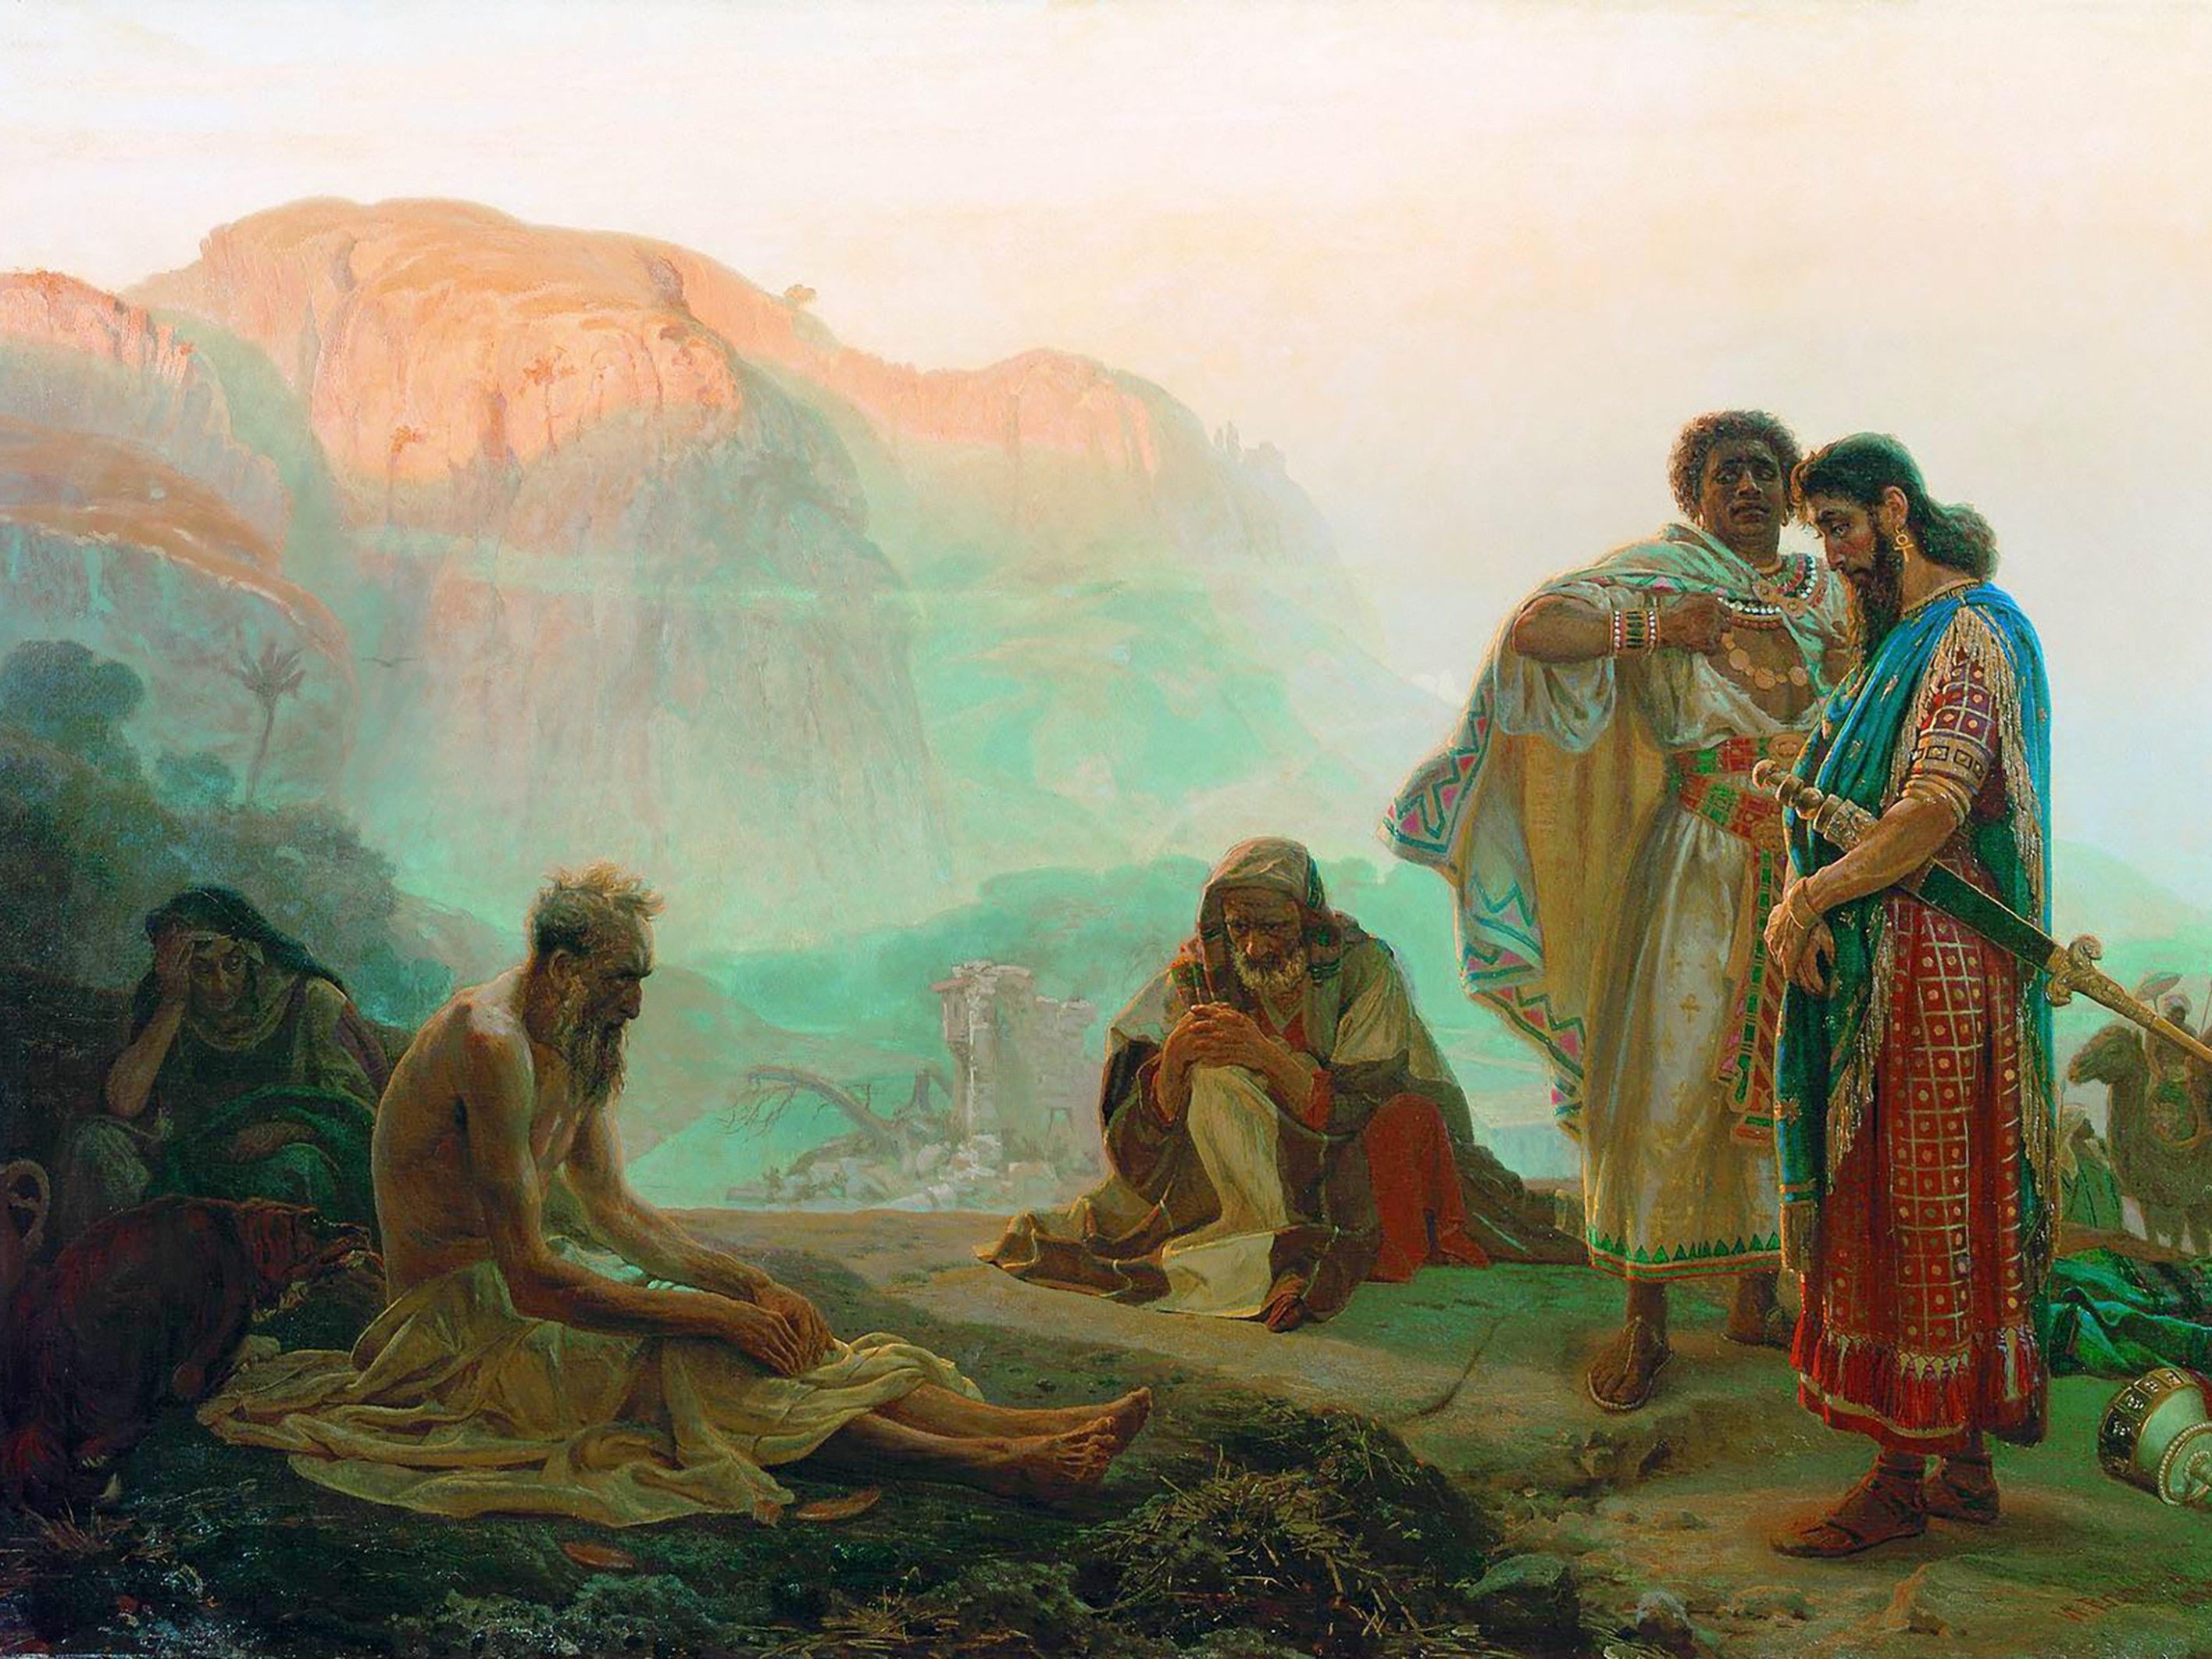 Painting of Job in an impoverished condition as his wife grieves behind him and three men observe.